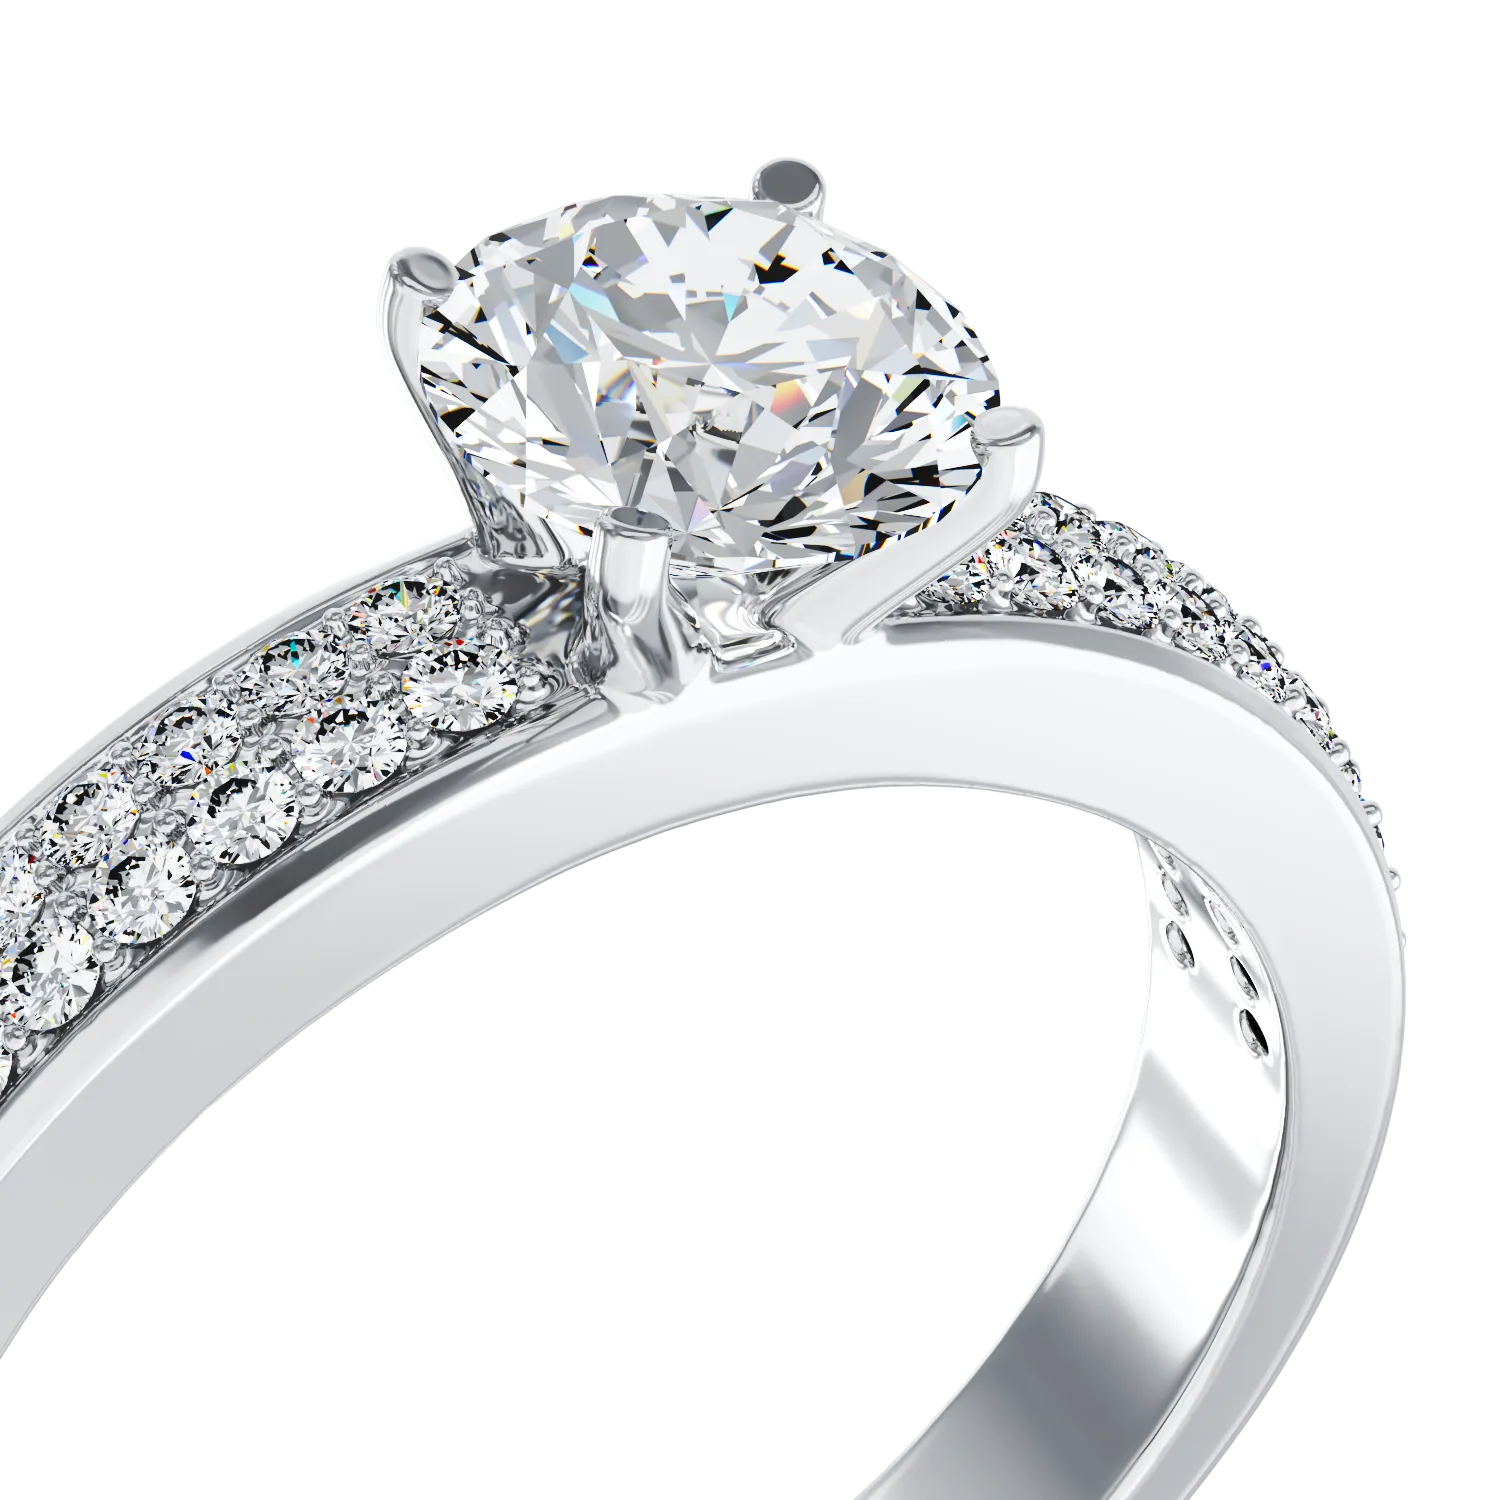 18K white gold engagement ring with 0.61ct diamond and 0.2ct diamonds